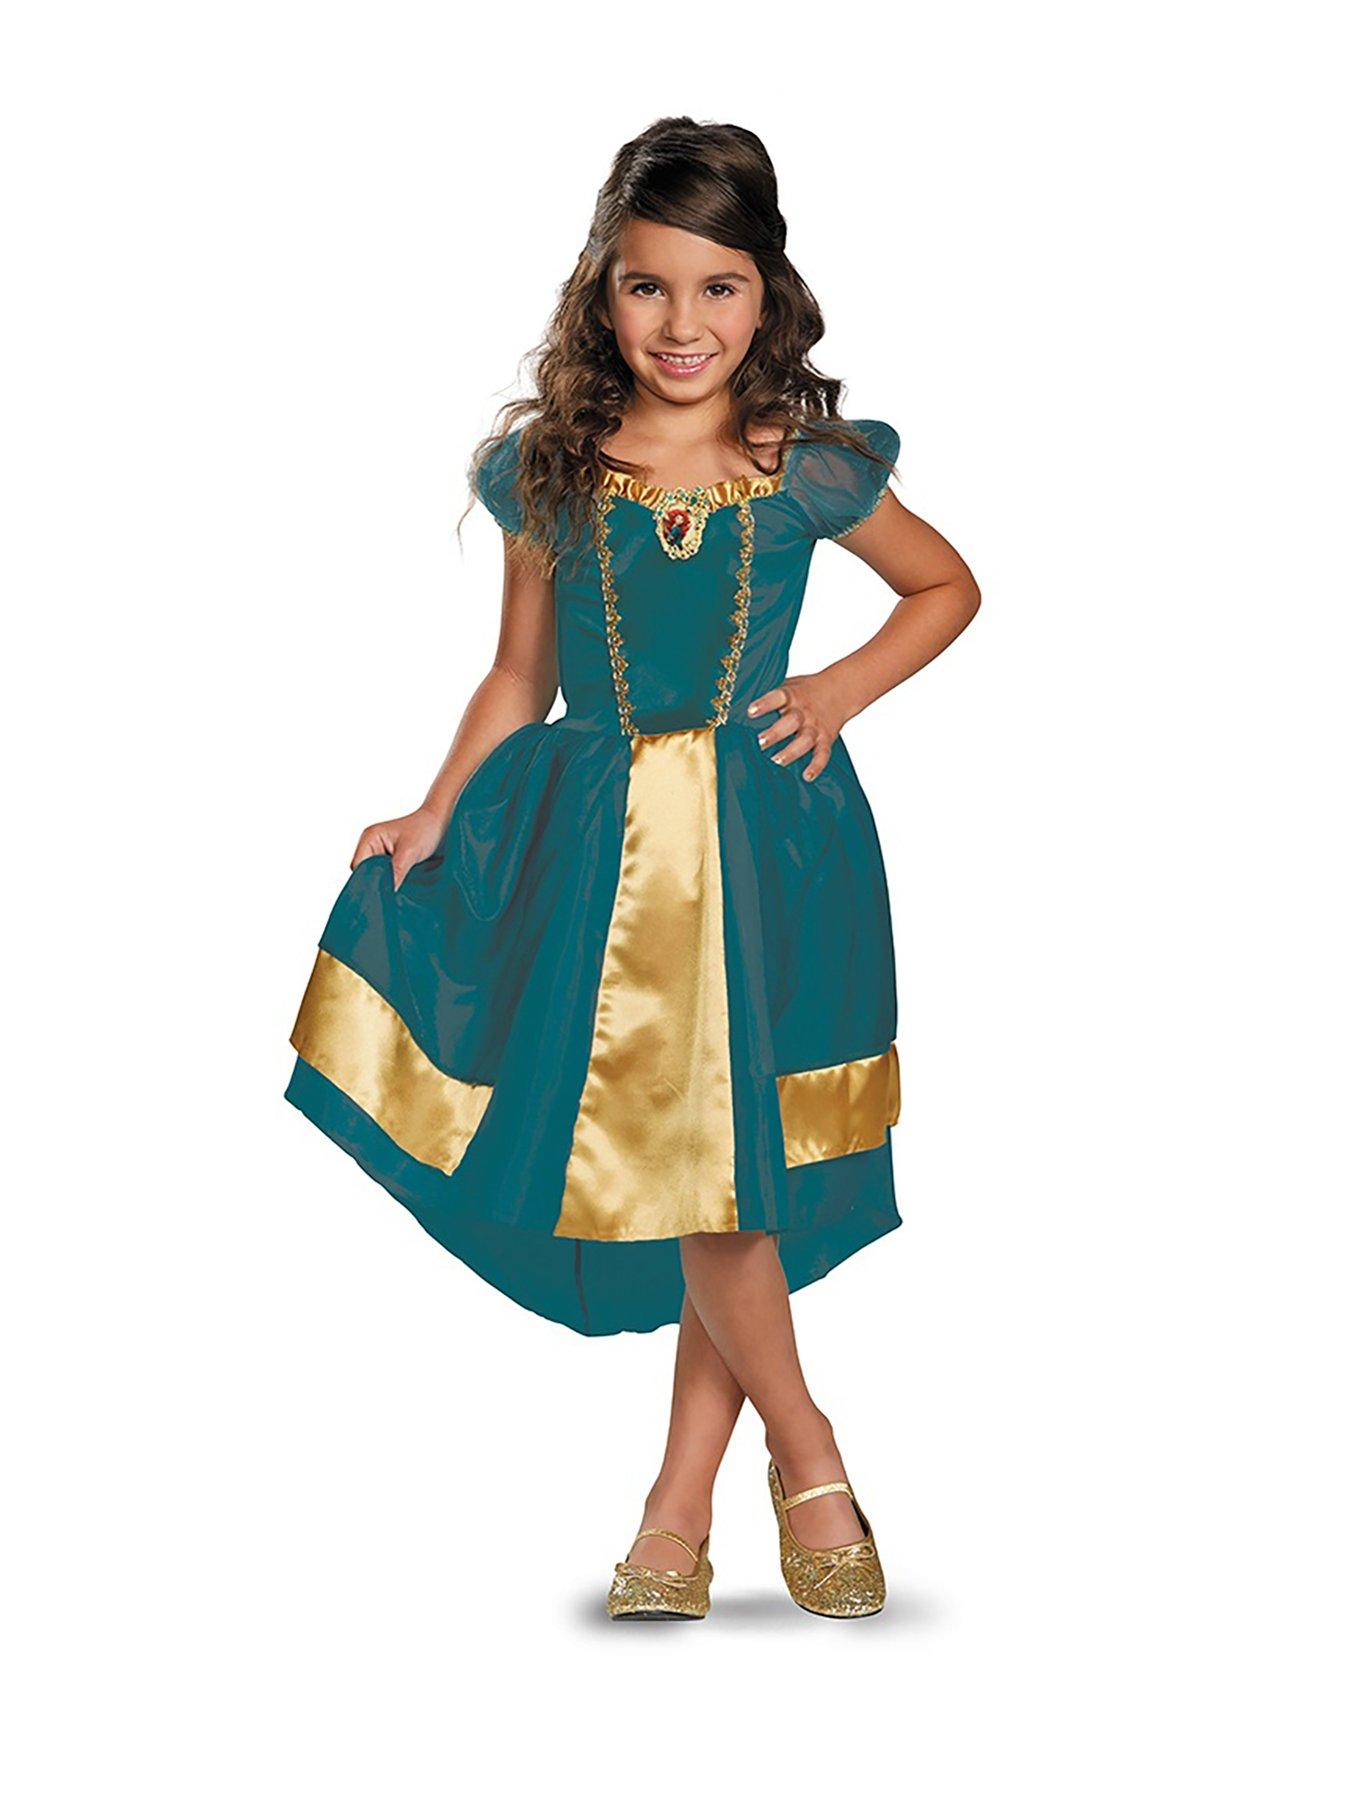 Princess Moana Mexican Dress Up Costume For Little Girls Perfect